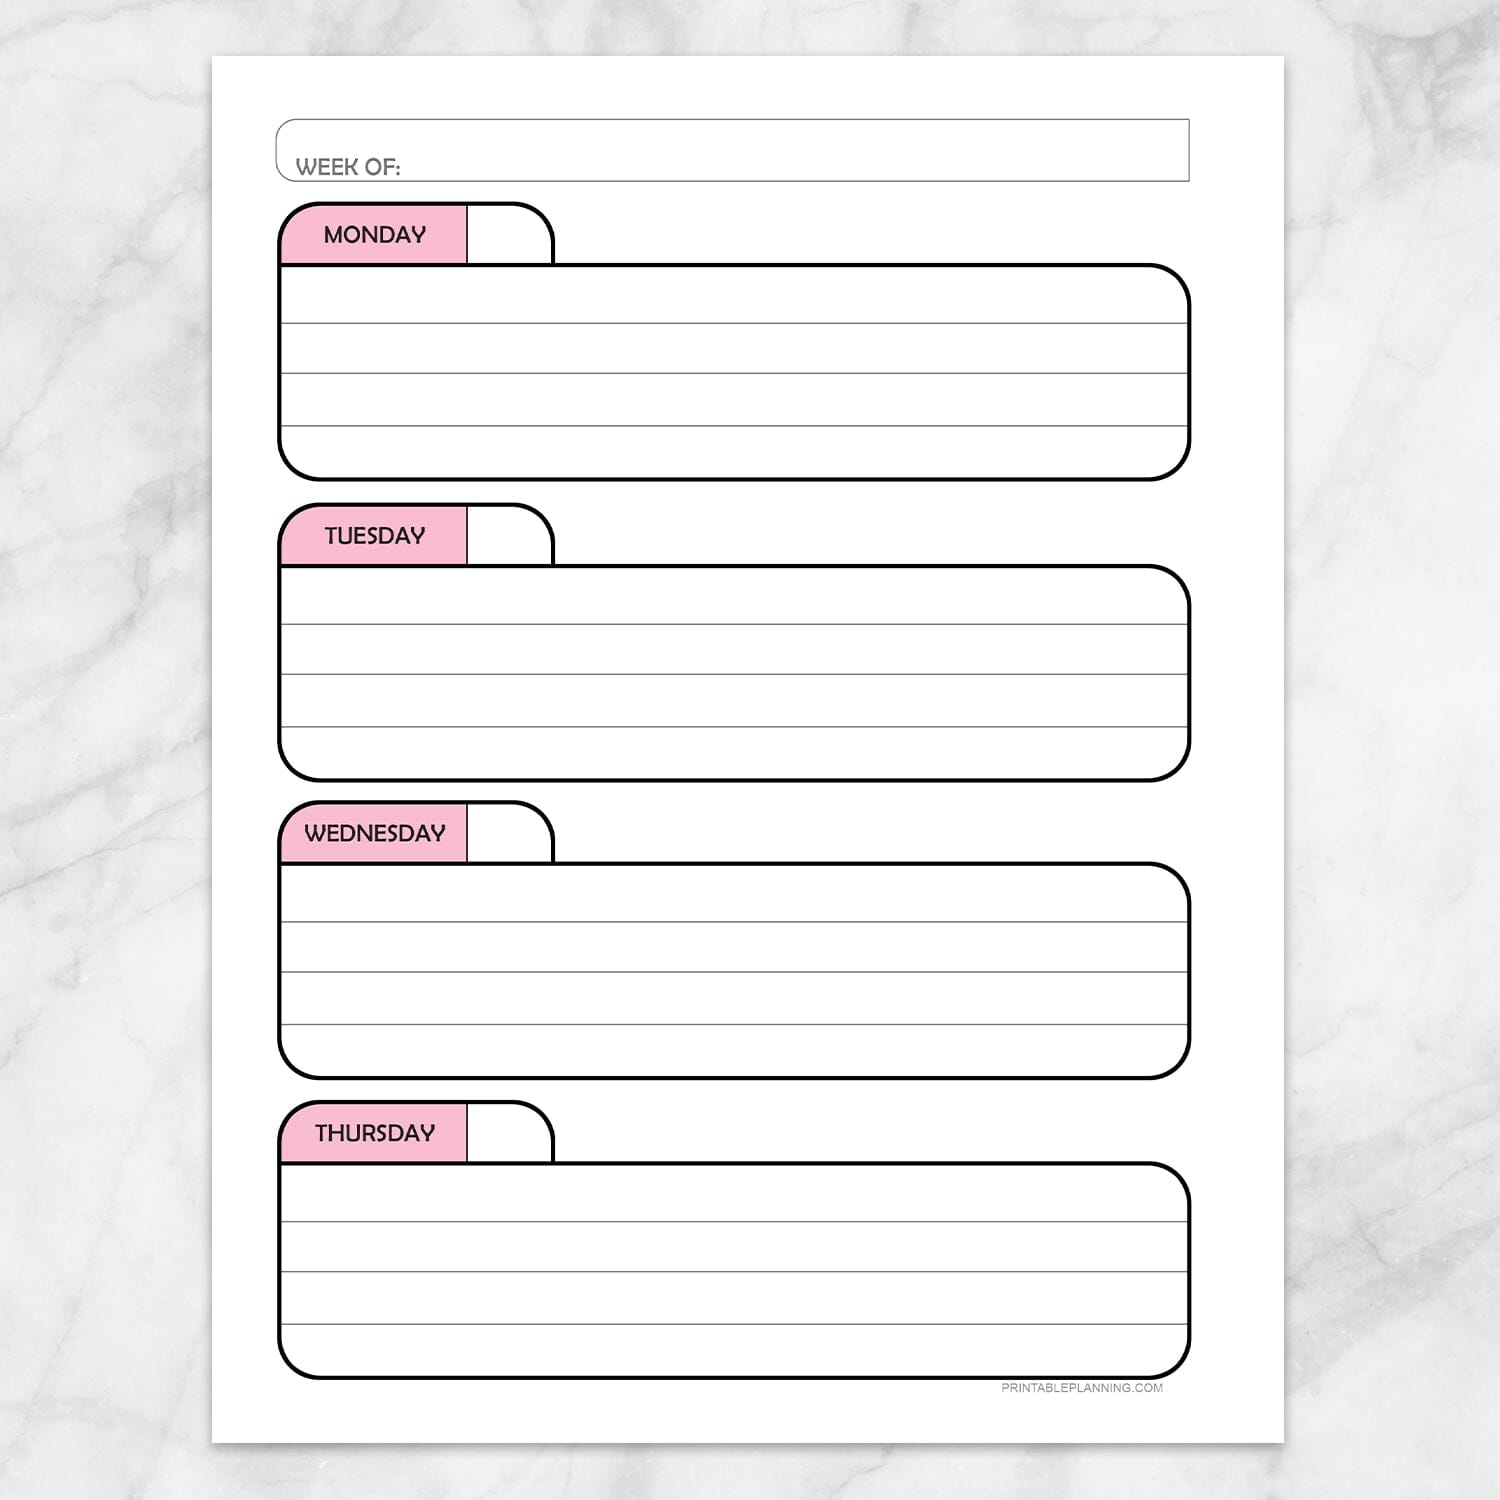 Printable Pink Weekly Calendar Planner Page (left page) at Printable Planning.